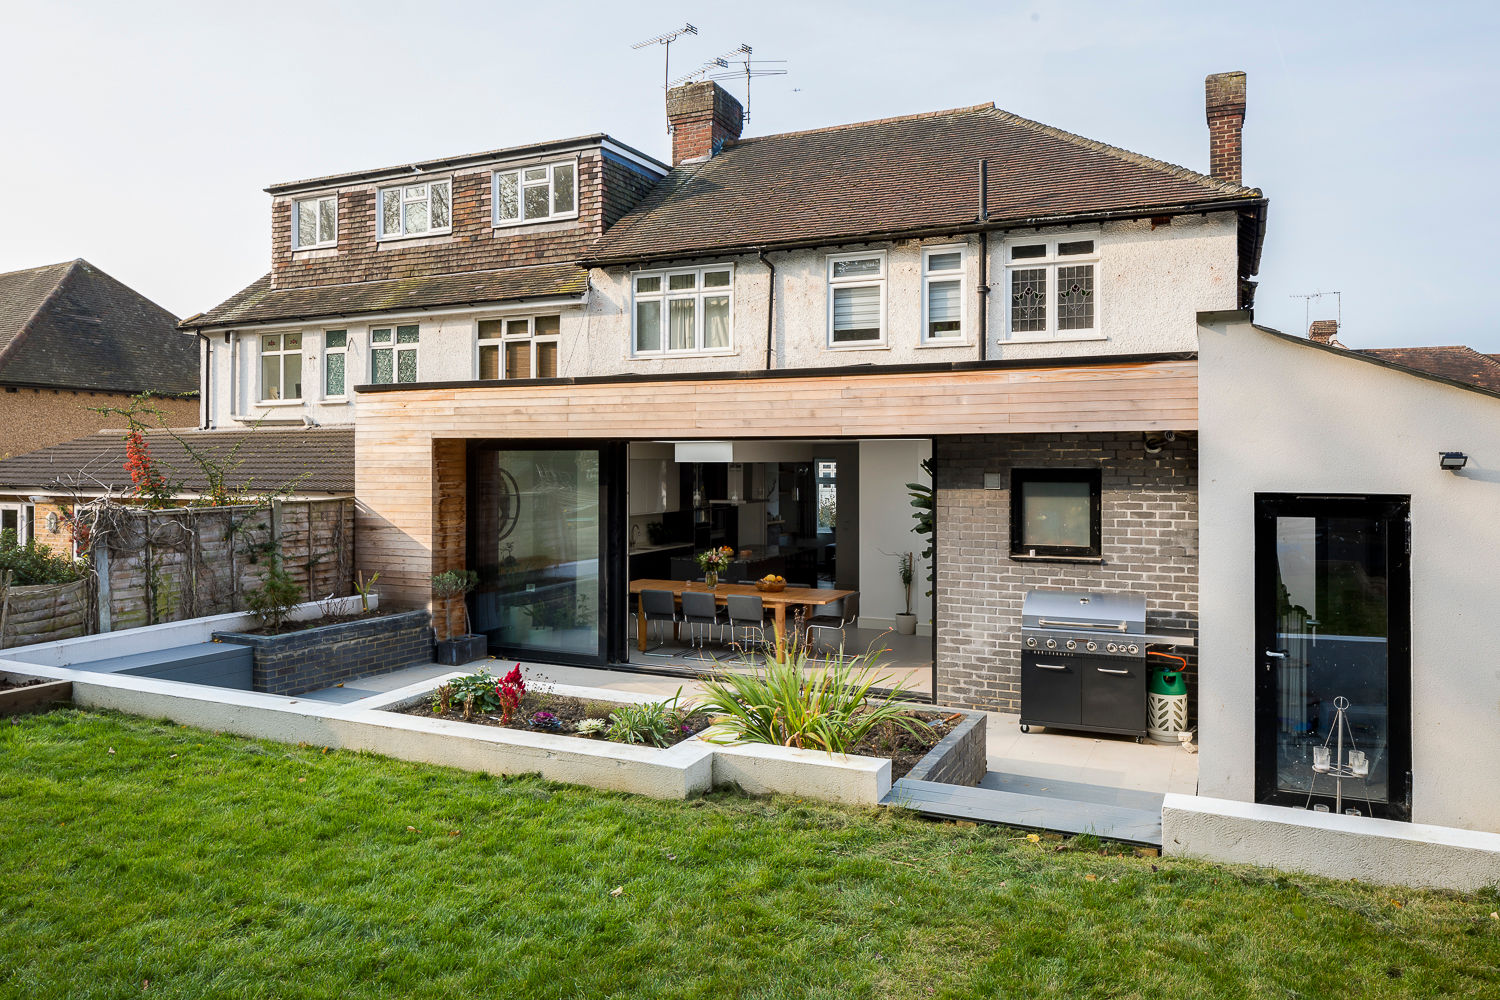 Large Rear Extension, Semi-detached House, Woodford Green, North-East London, Model Projects Ltd Model Projects Ltd Casas modernas: Ideas, imágenes y decoración model projects,timber cladding,planters,slidding doors